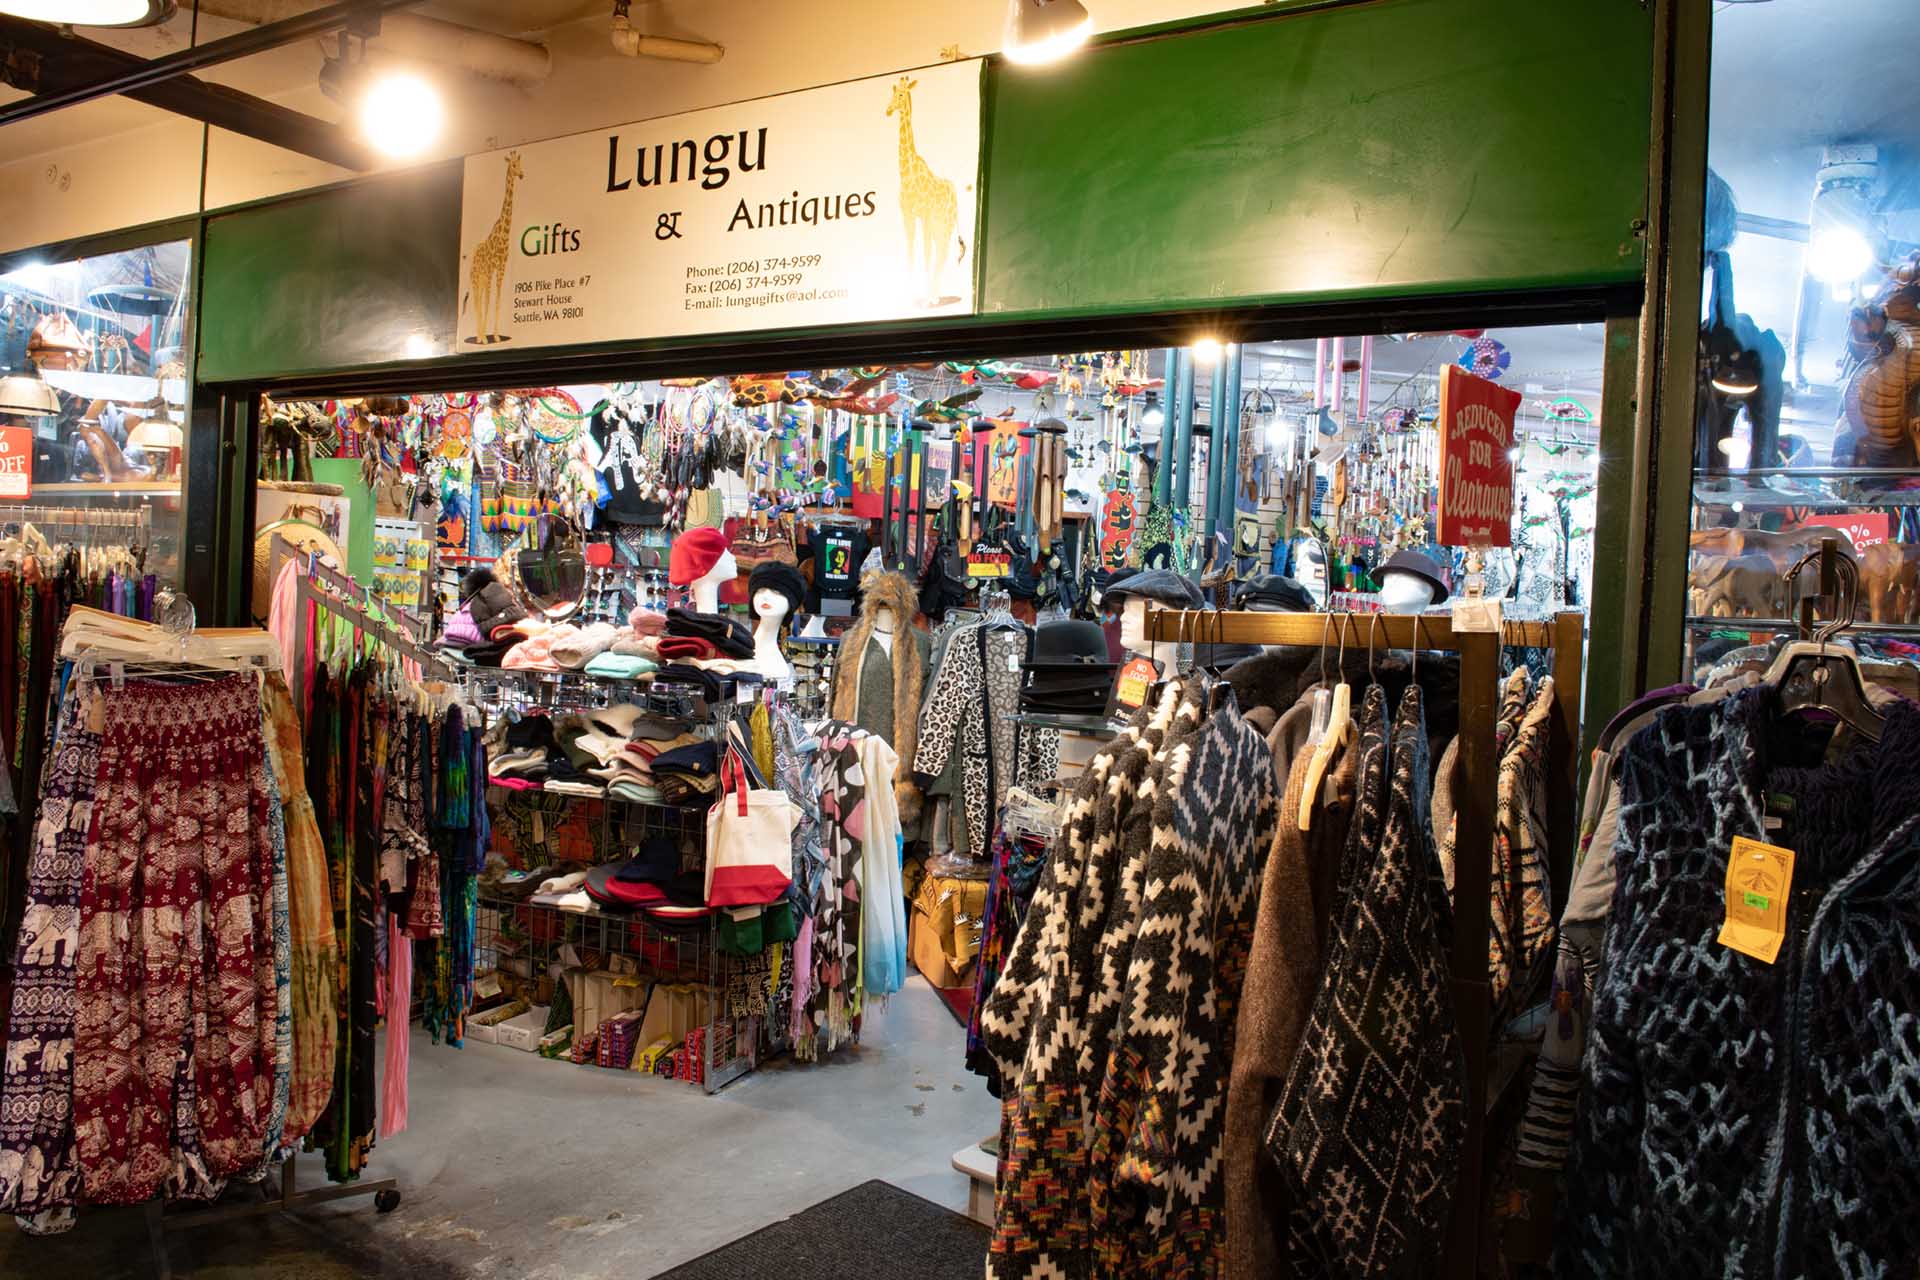 https://www.pikeplacemarket.org/wp-content/uploads/2021/08/lungu_gifts_antiques-pike_place_market.jpg